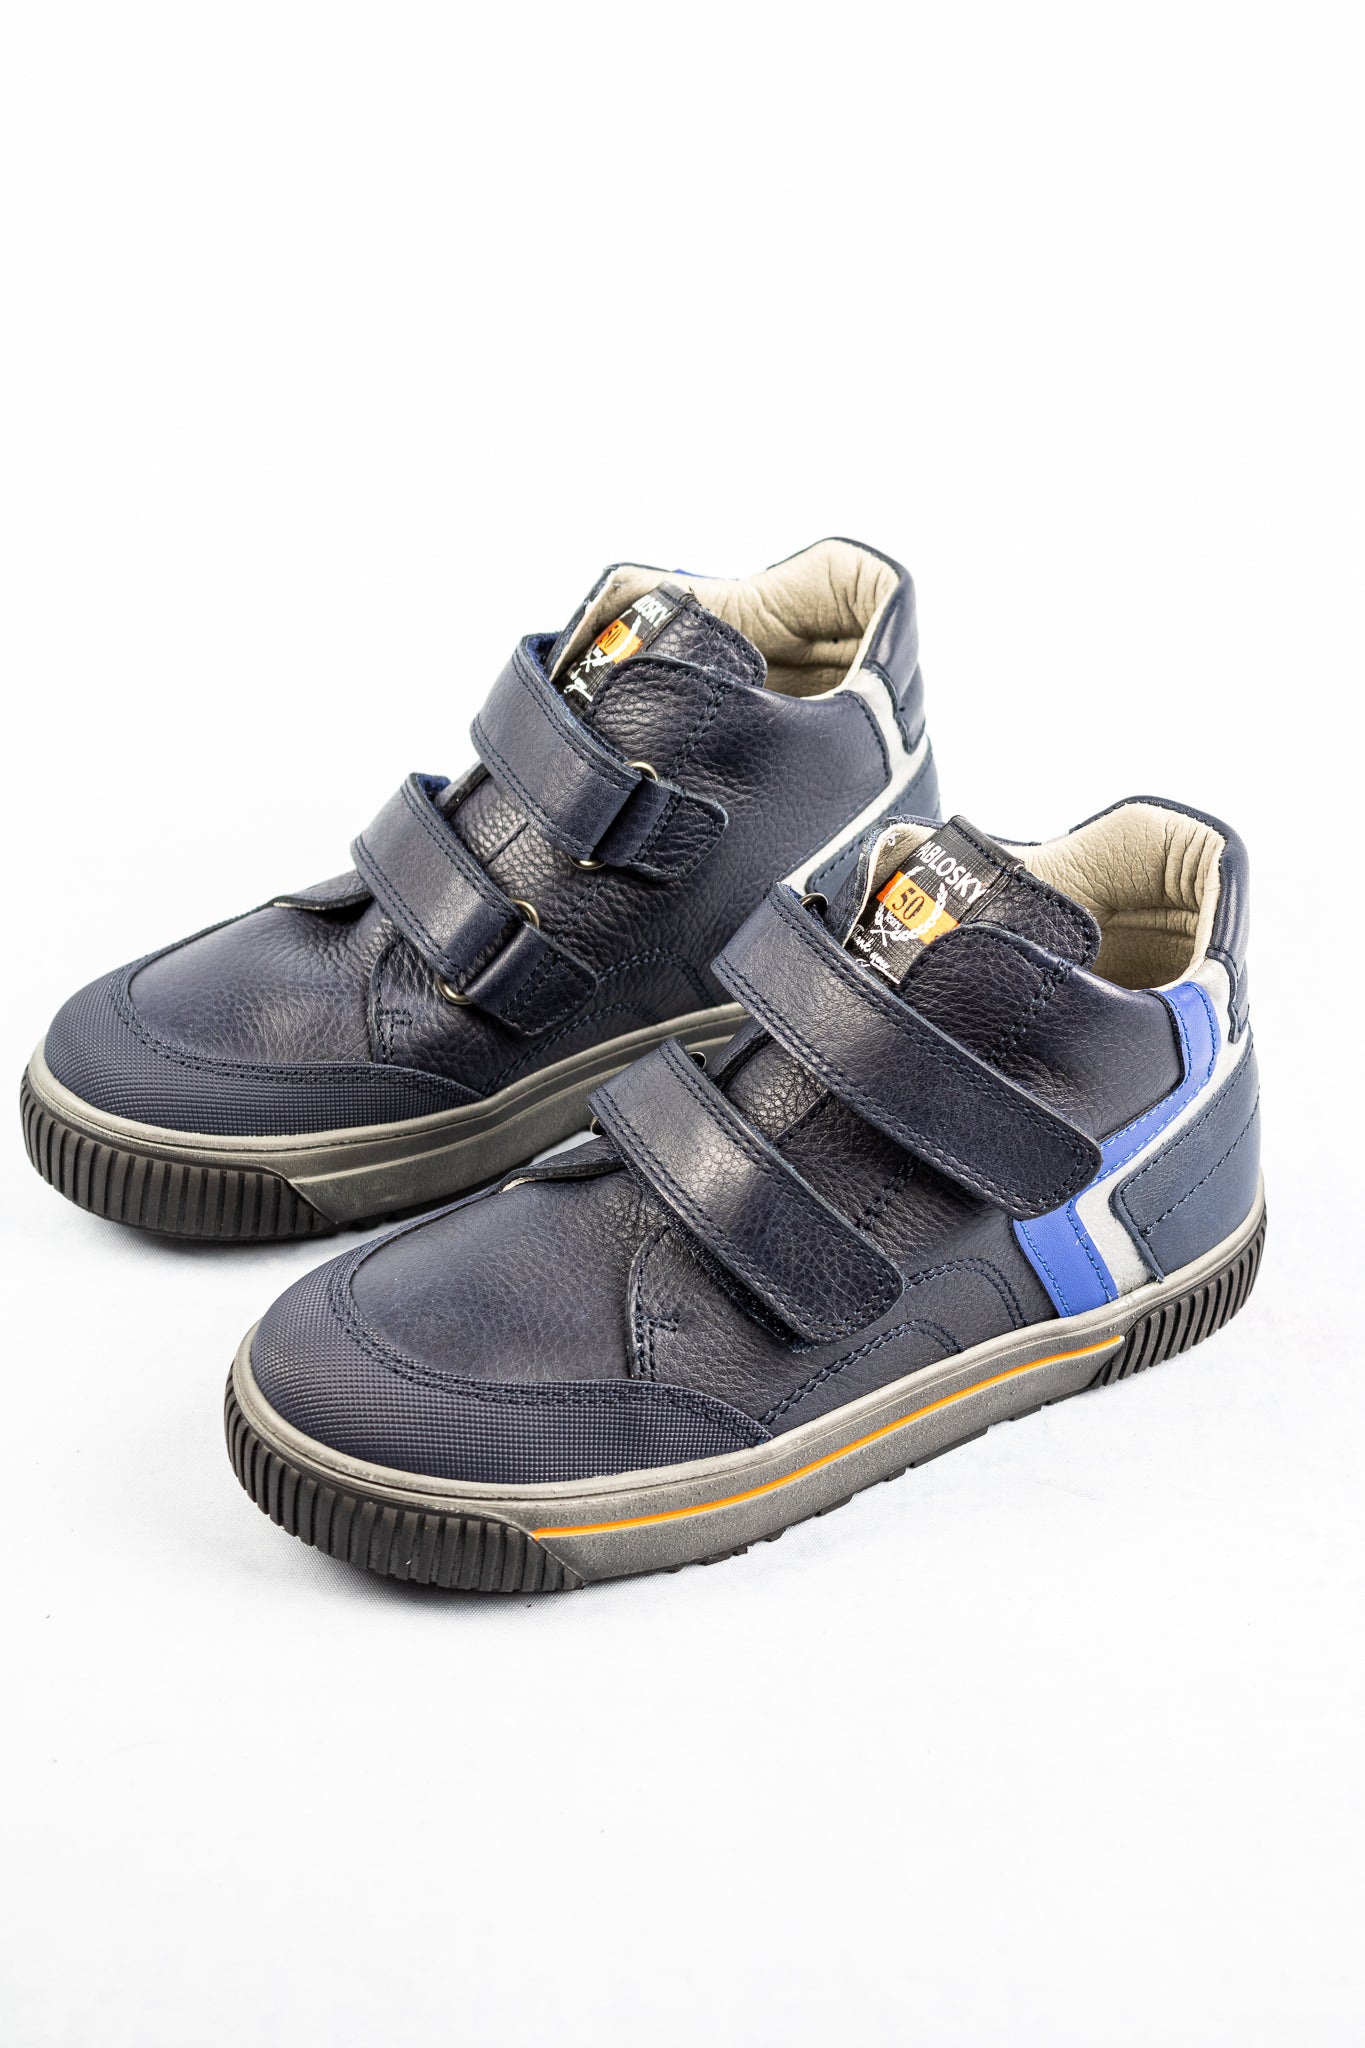 592721 Pablosky Boys Navy Boot for sale online ireland